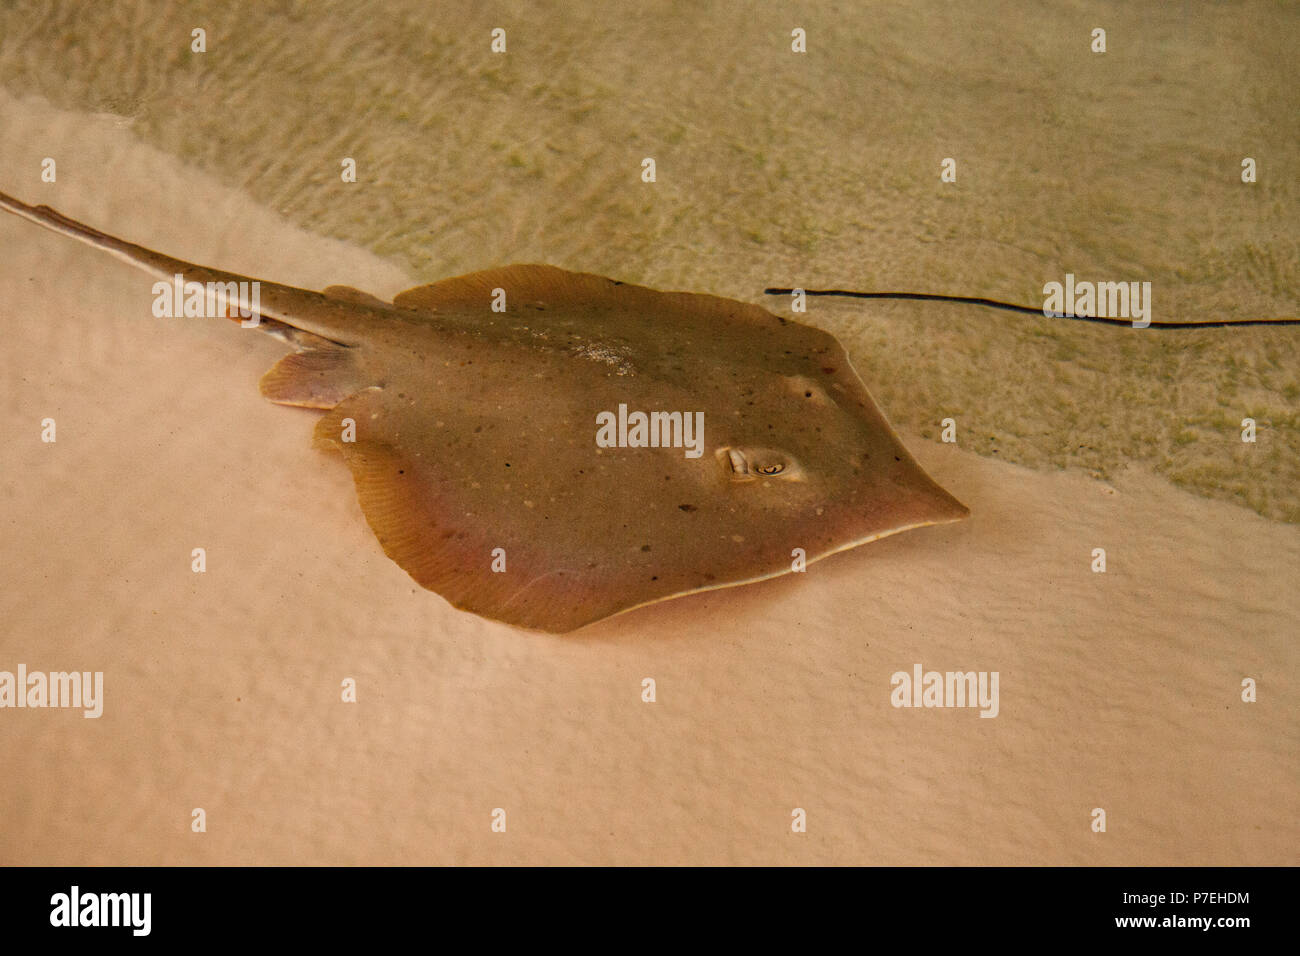 Pointed-nose stingray Himantura jenkinsii sifts sand through its mouth in search of food along the bottom of the ocean floor. Stock Photo